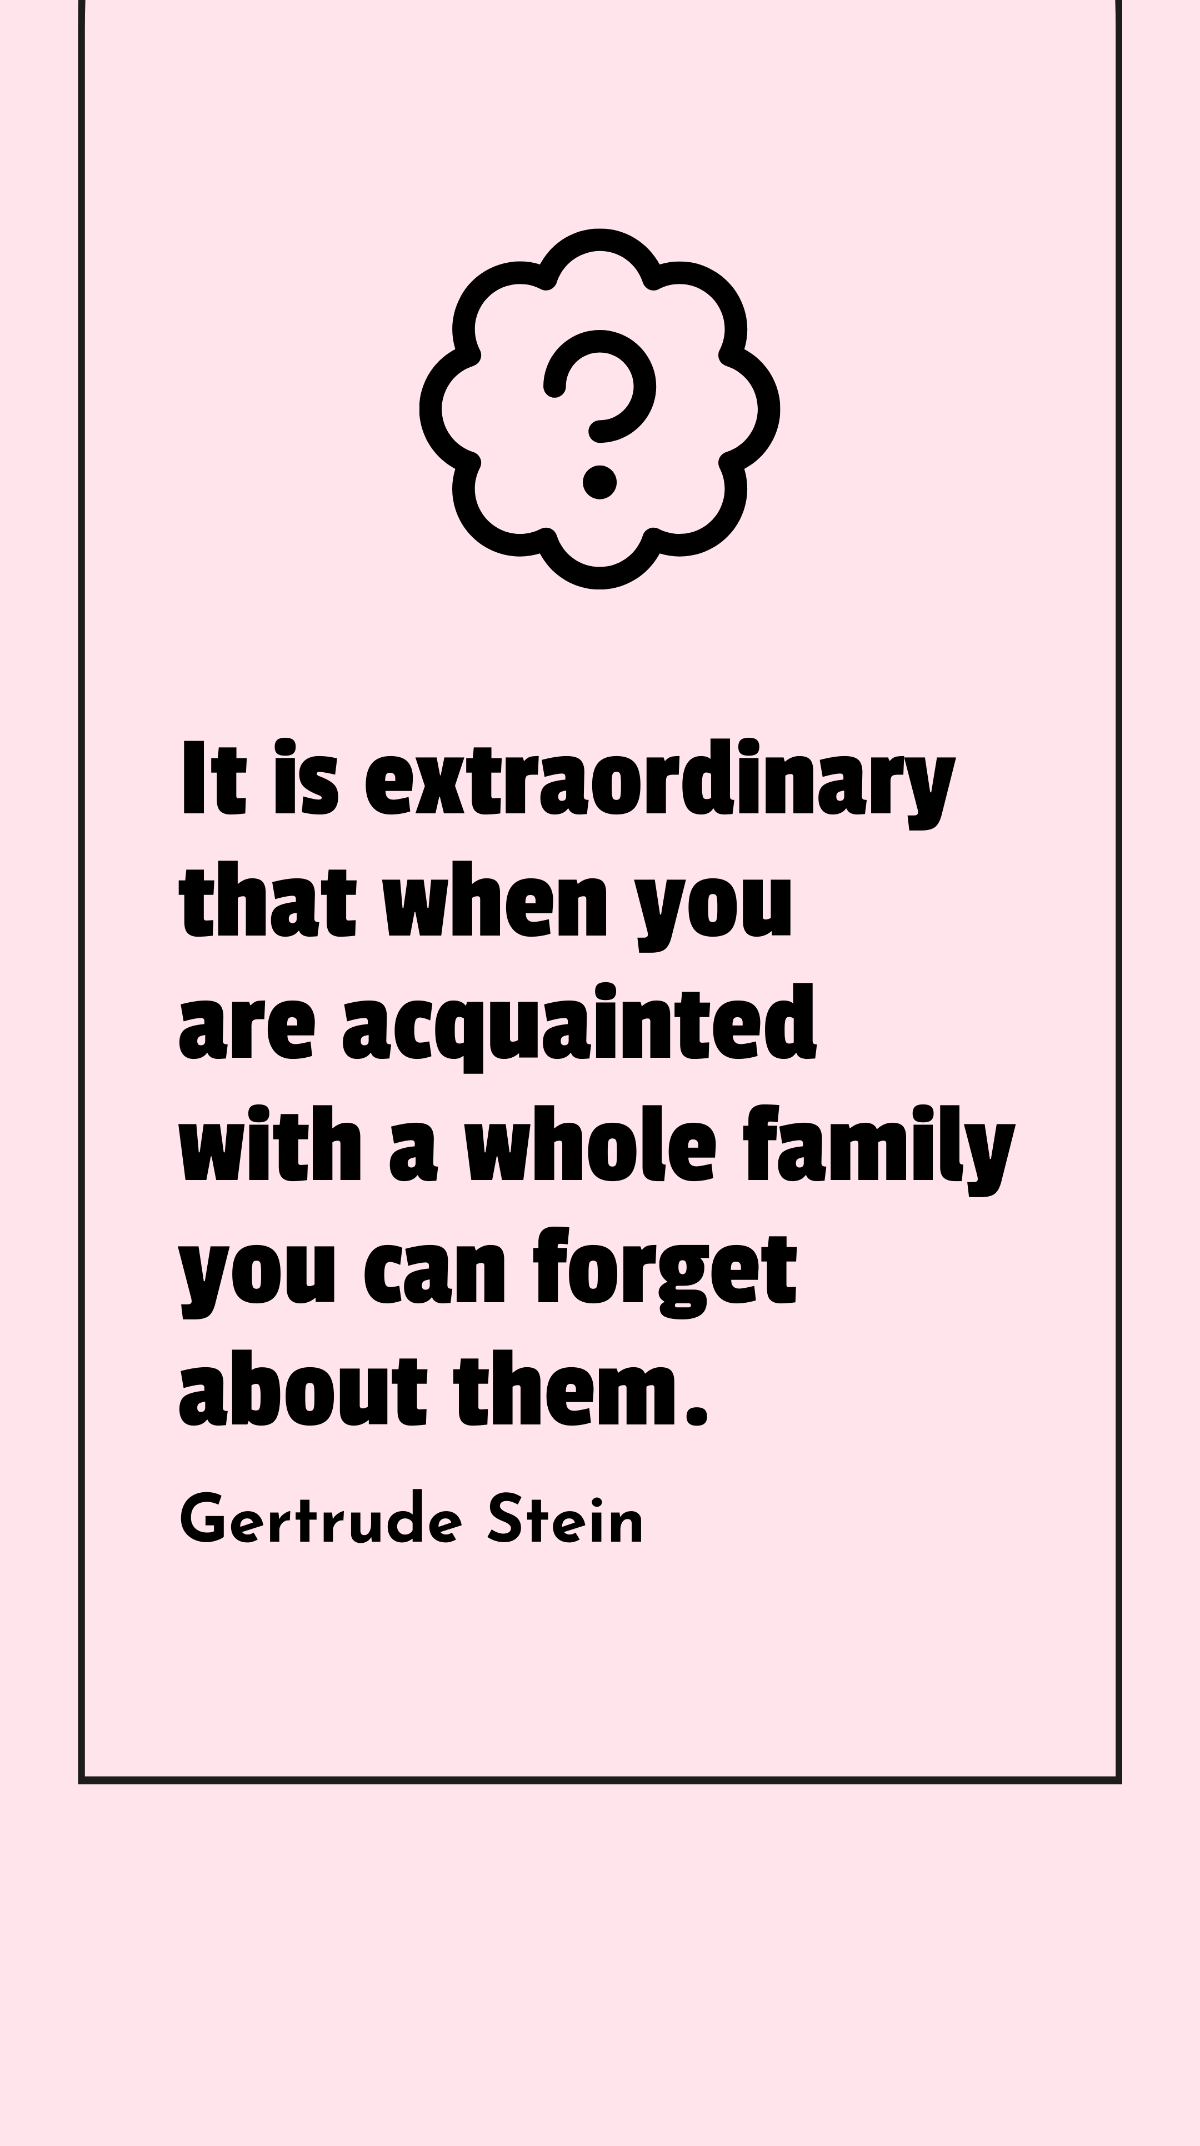 Gertrude Stein - It is extraordinary that when you are acquainted with a whole family you can forget about them. Template